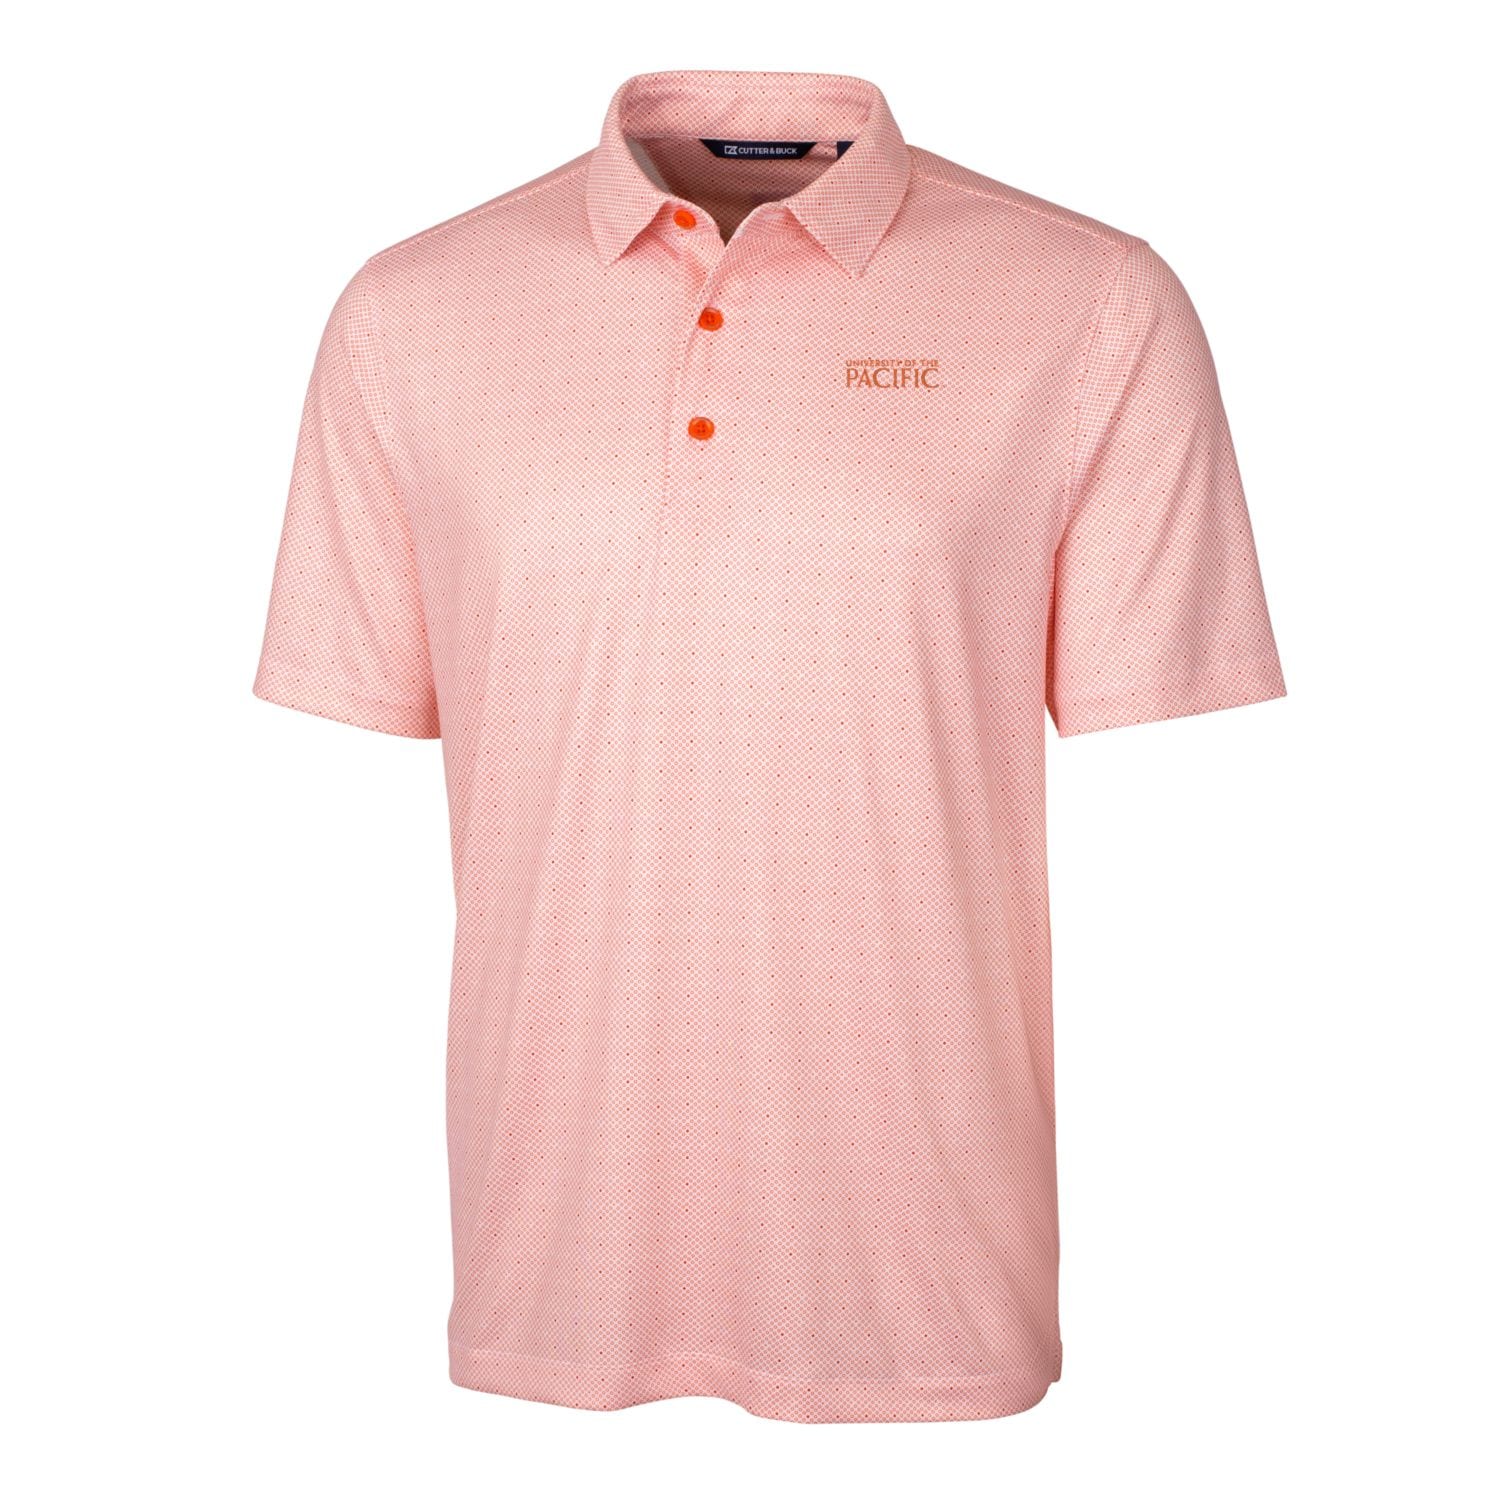 Men's Cutter & Buck Orange Pacific Tigers Big & Tall Pike Double Dot Print Stretch Polo - image 2 of 3